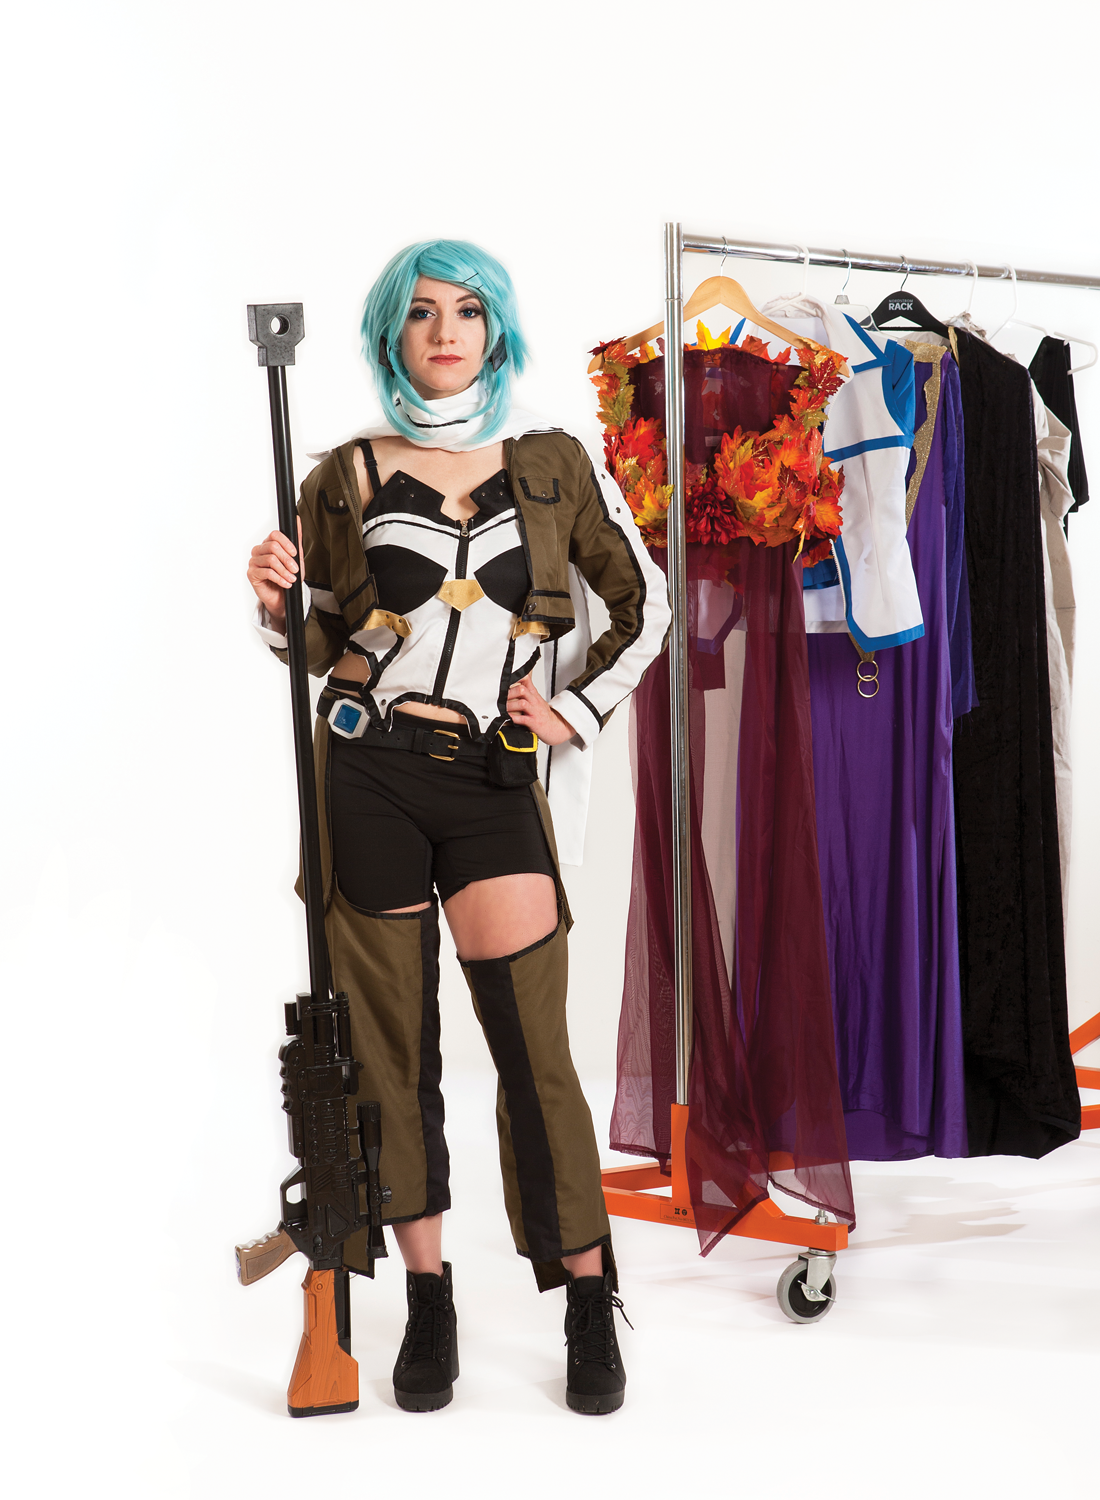 Alysa Fratto poses in cosplay, and on the background there is a clothing rack showcasing other cosplays she created. 